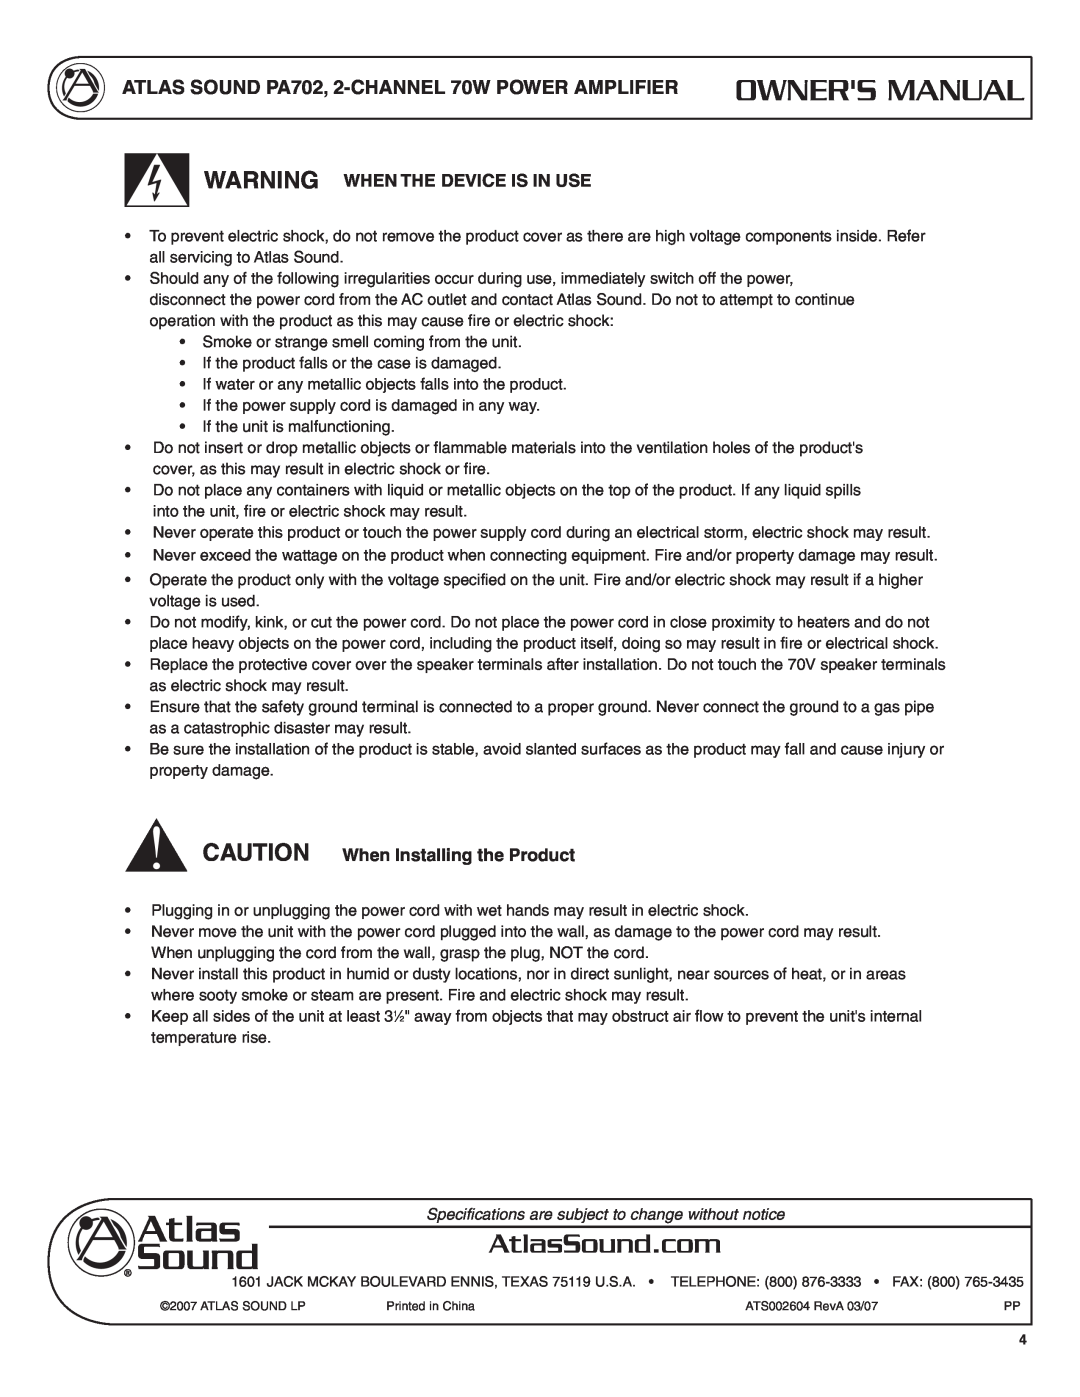 Atlas Sound PA702 specifications Warning When The Device Is In Use, CAUTION When Installing the Product 